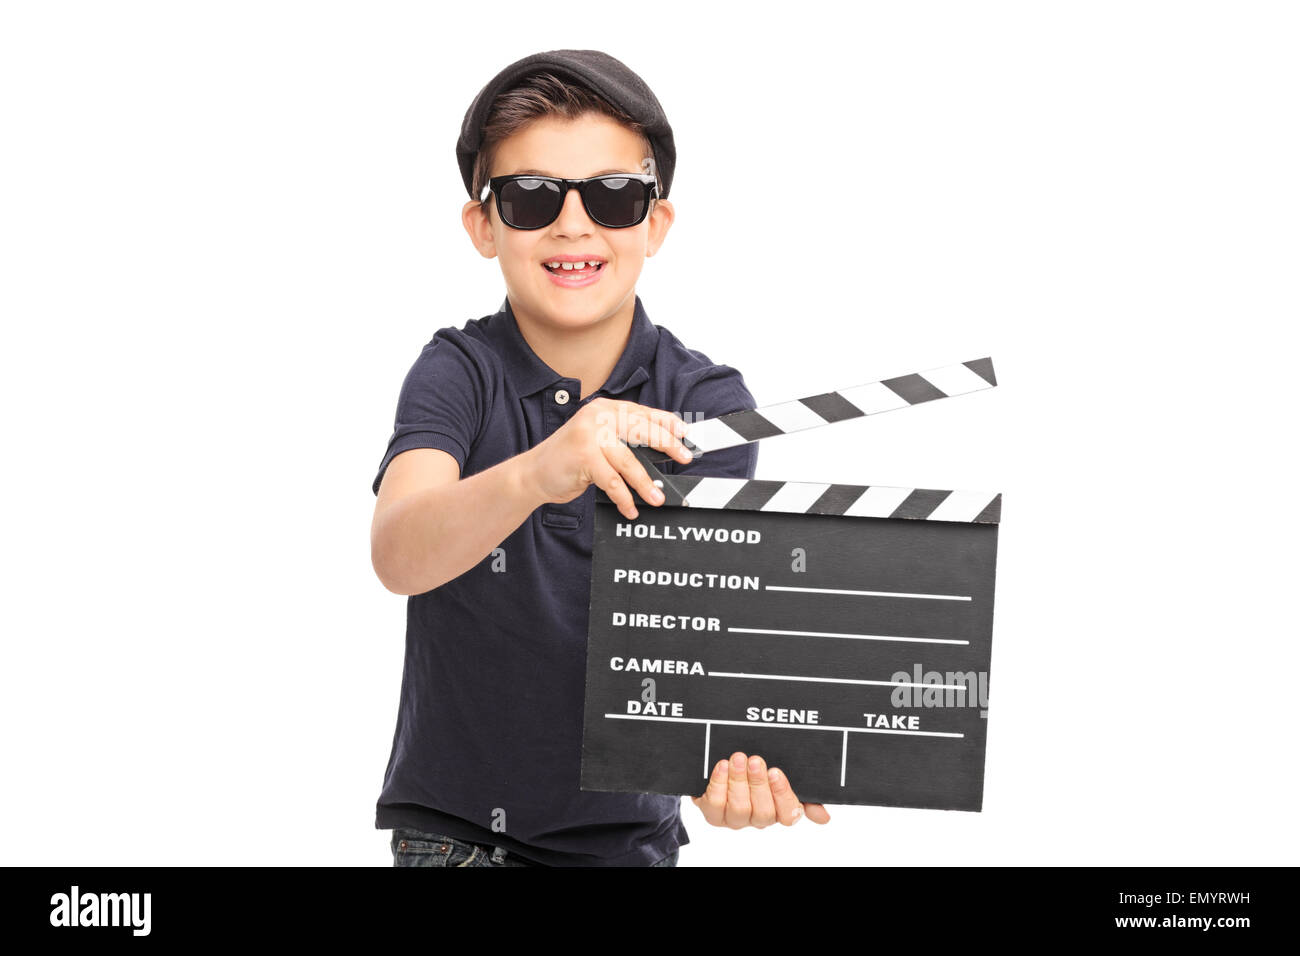 Little boy with sunglasses and a black beret having fun with a movie clapperboard isolated on white background Stock Photo